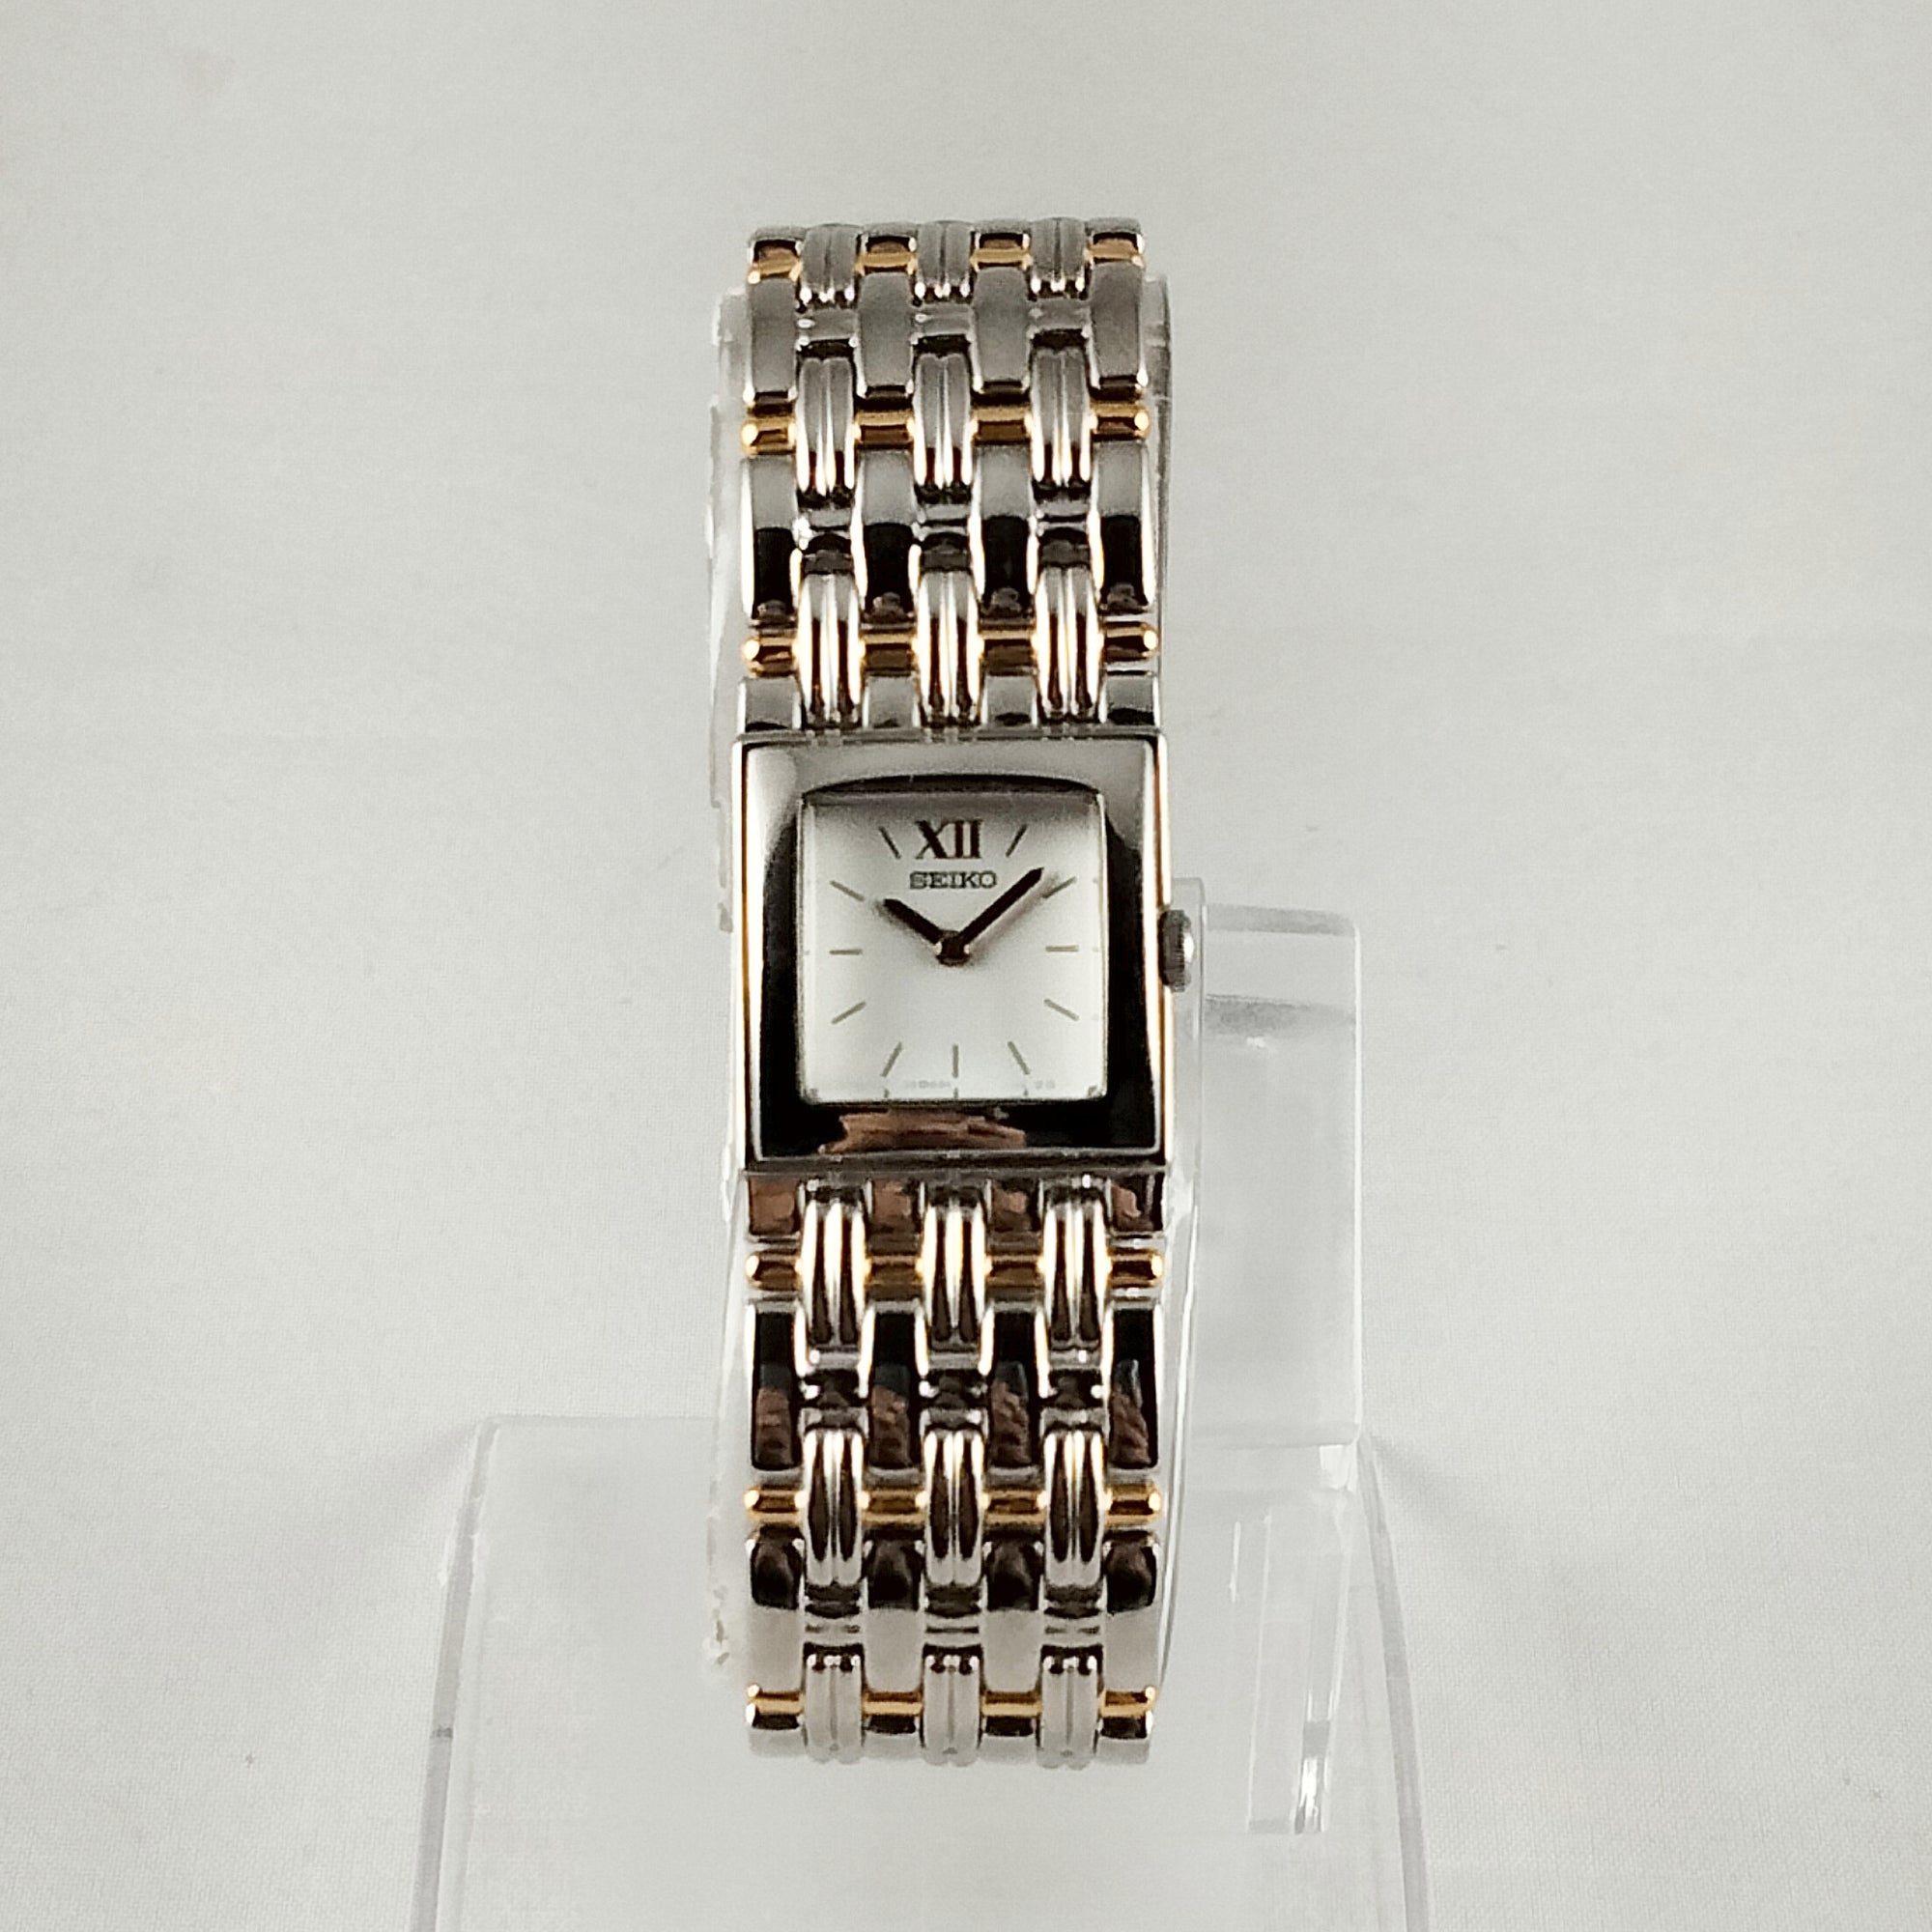 Seiko Women's Watch, Sqaure Dial, Gold and Silver Tone, Bracelet Strap